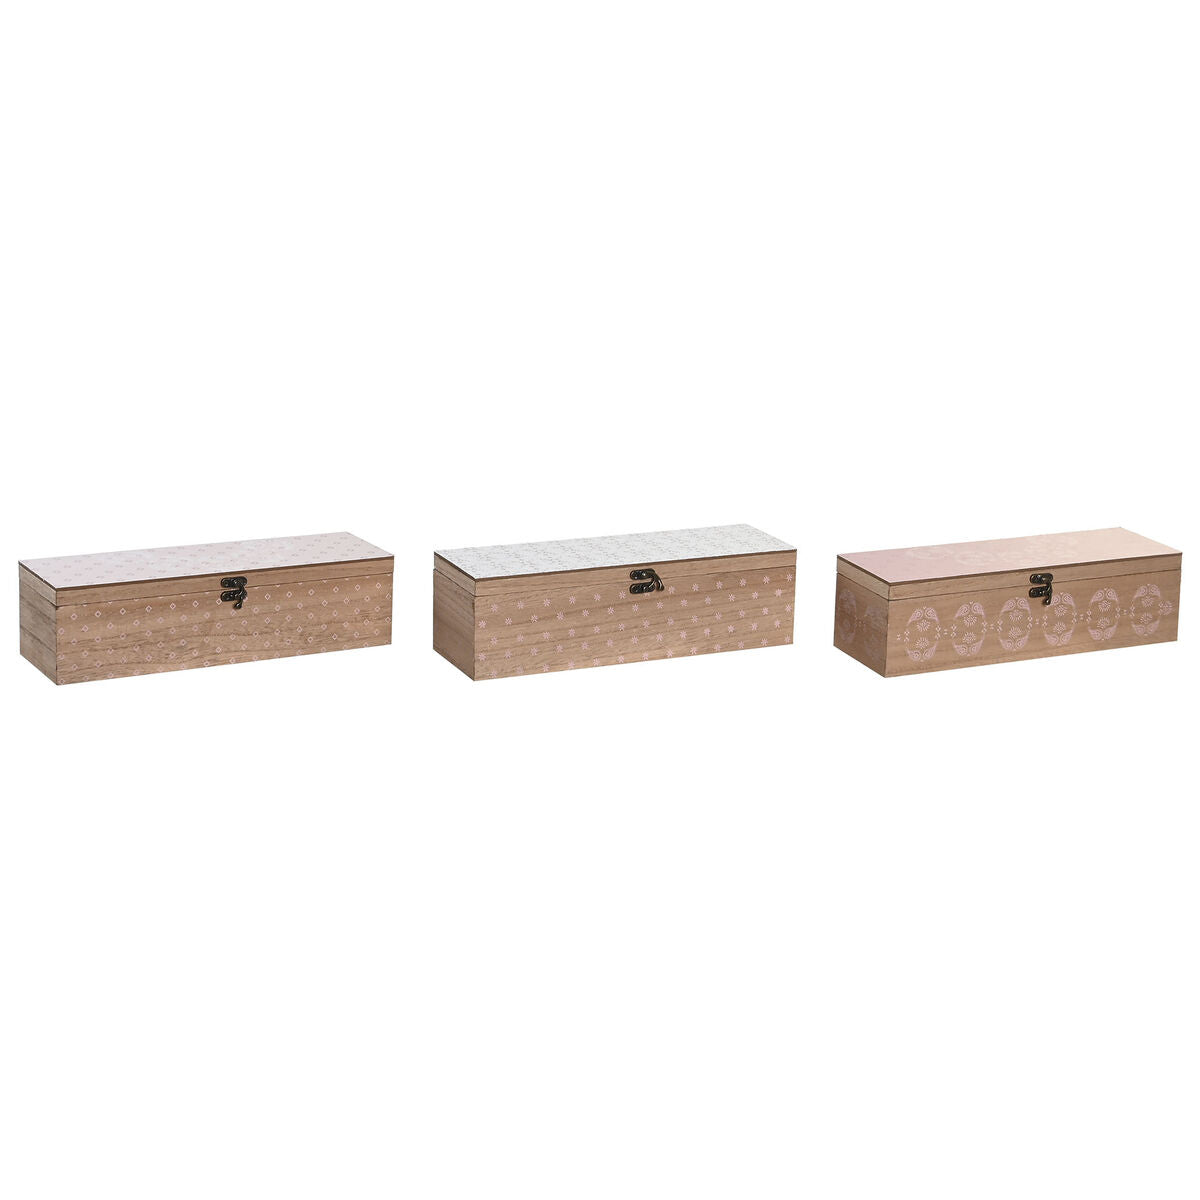 Box for Infusions DKD Home Decor 30 x 9 x 8 cm Kristal Roze Wit 3 Onderdelen Hout MDF